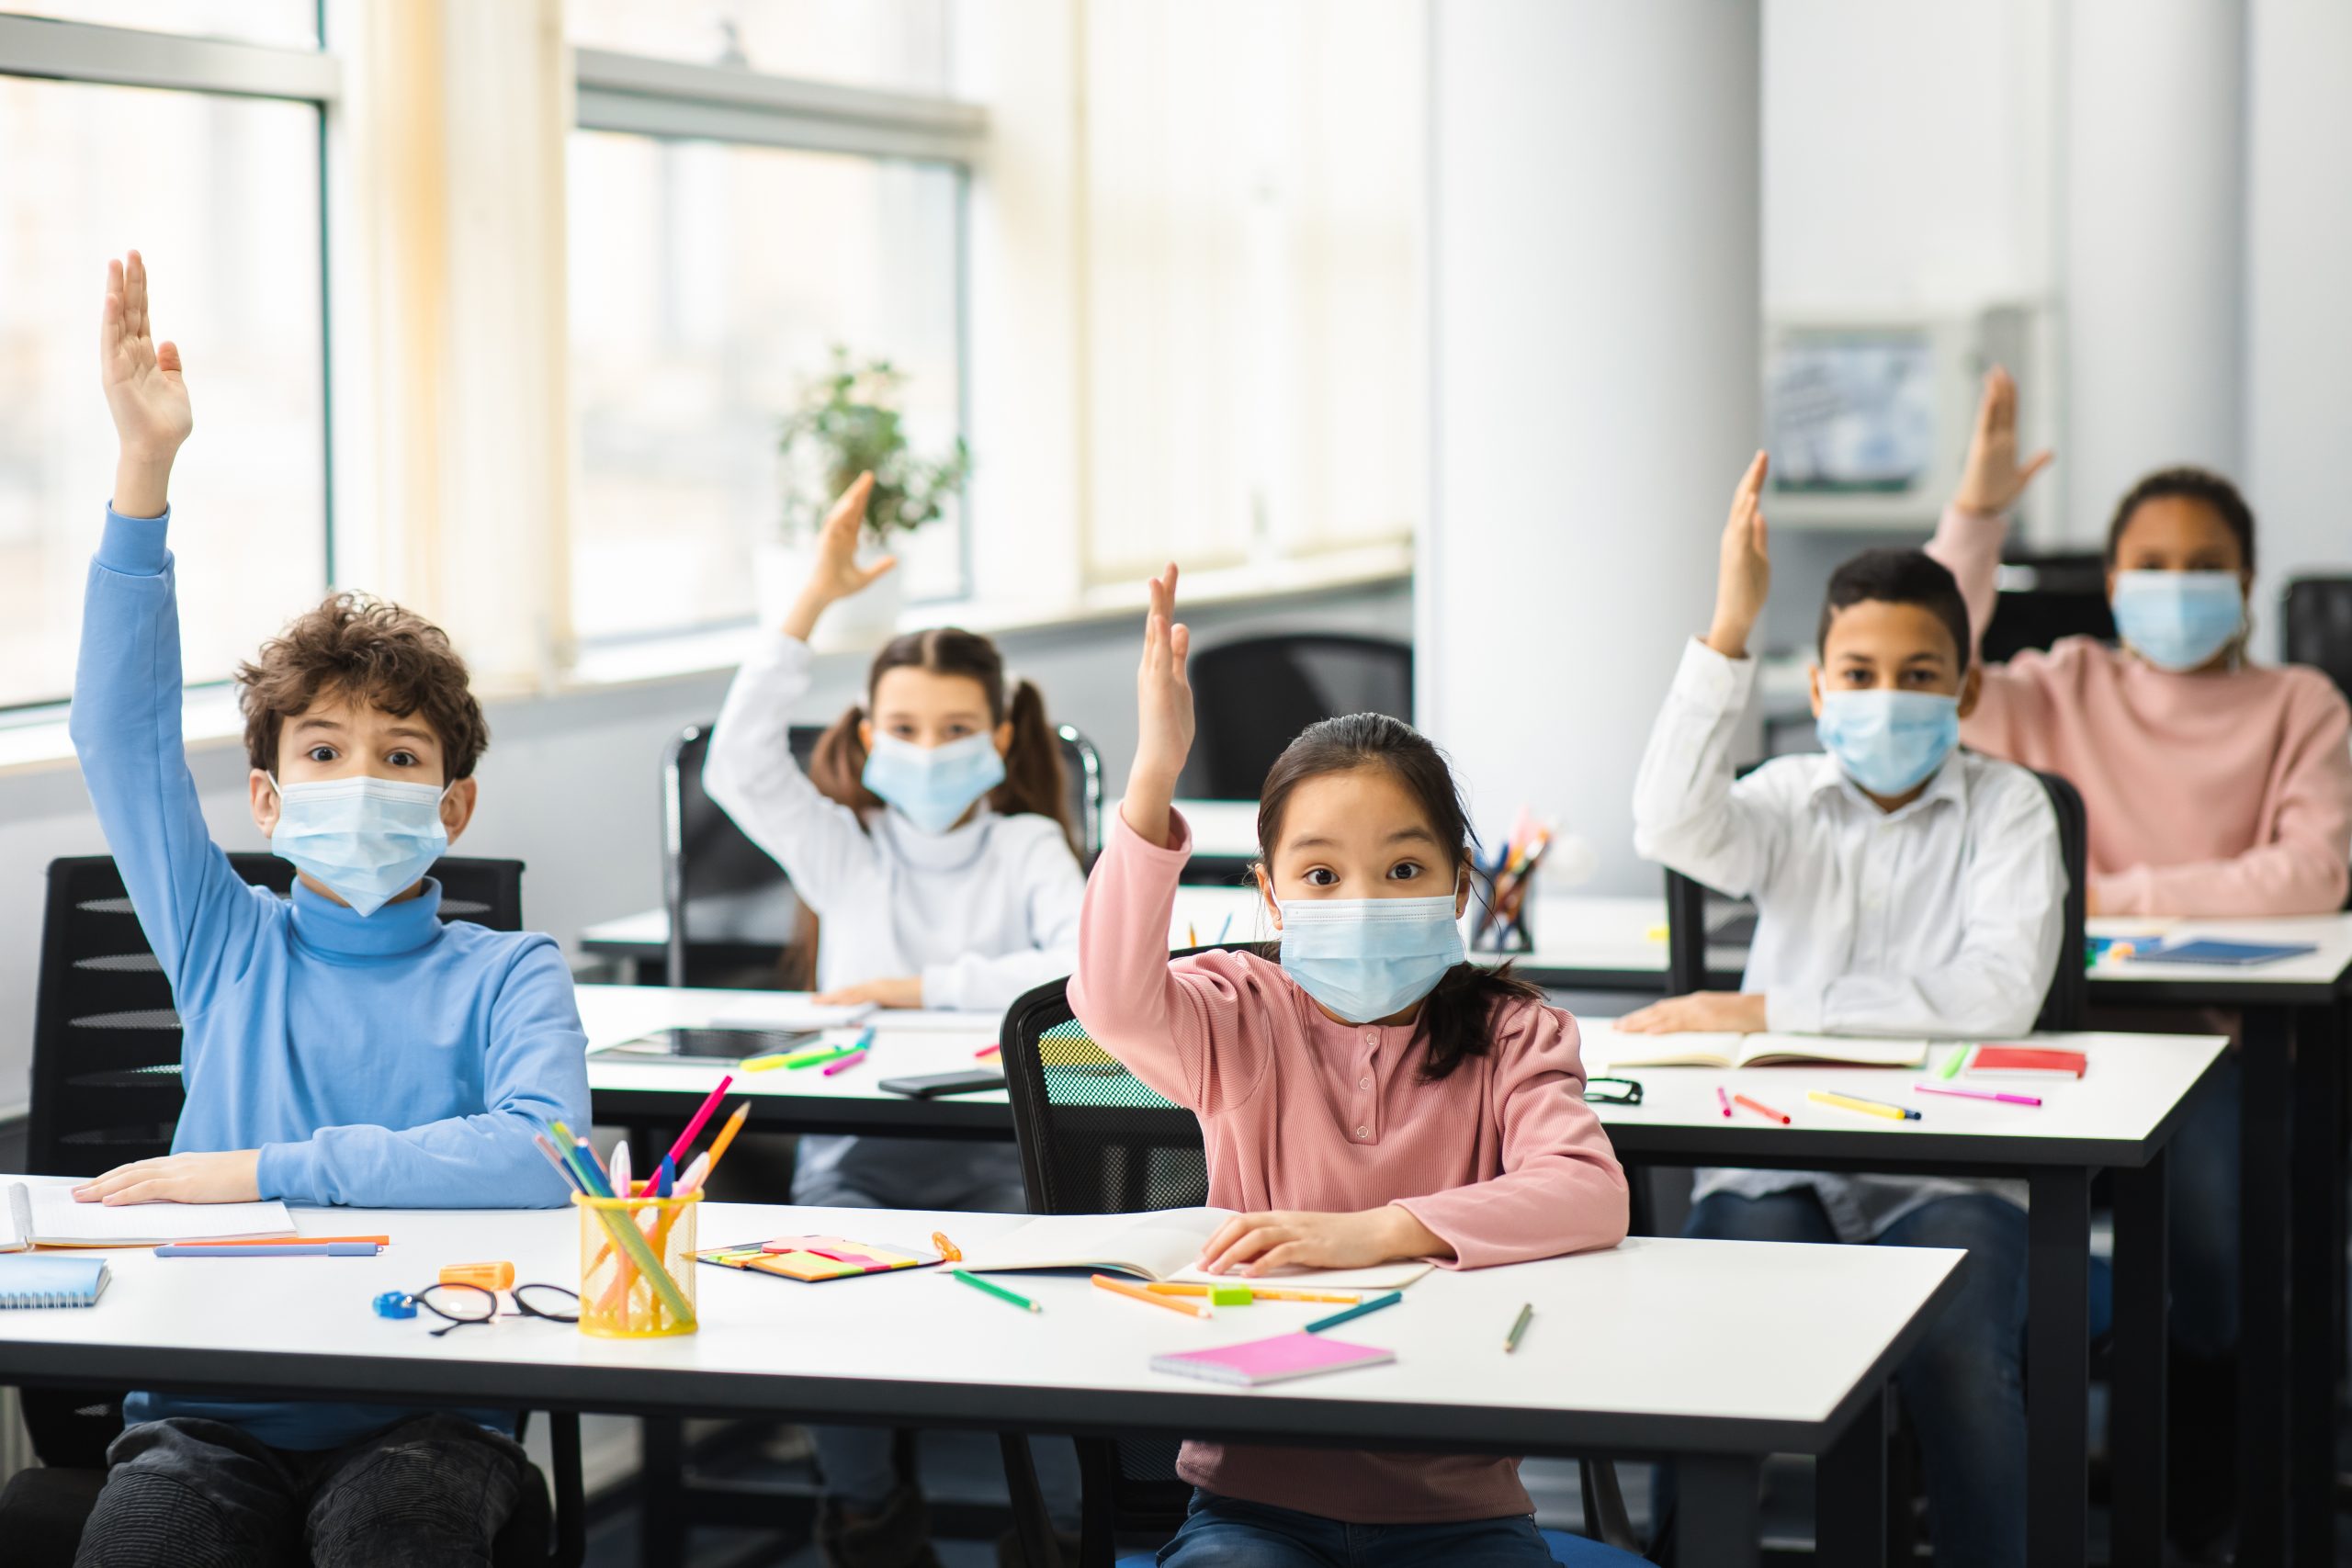 Coronavirus Pandemic And Reopening Schools. Multicultural small school children raising hands at lesson, ready for answer. Diverse pupils wearing disposable surgical masks for protection from virus